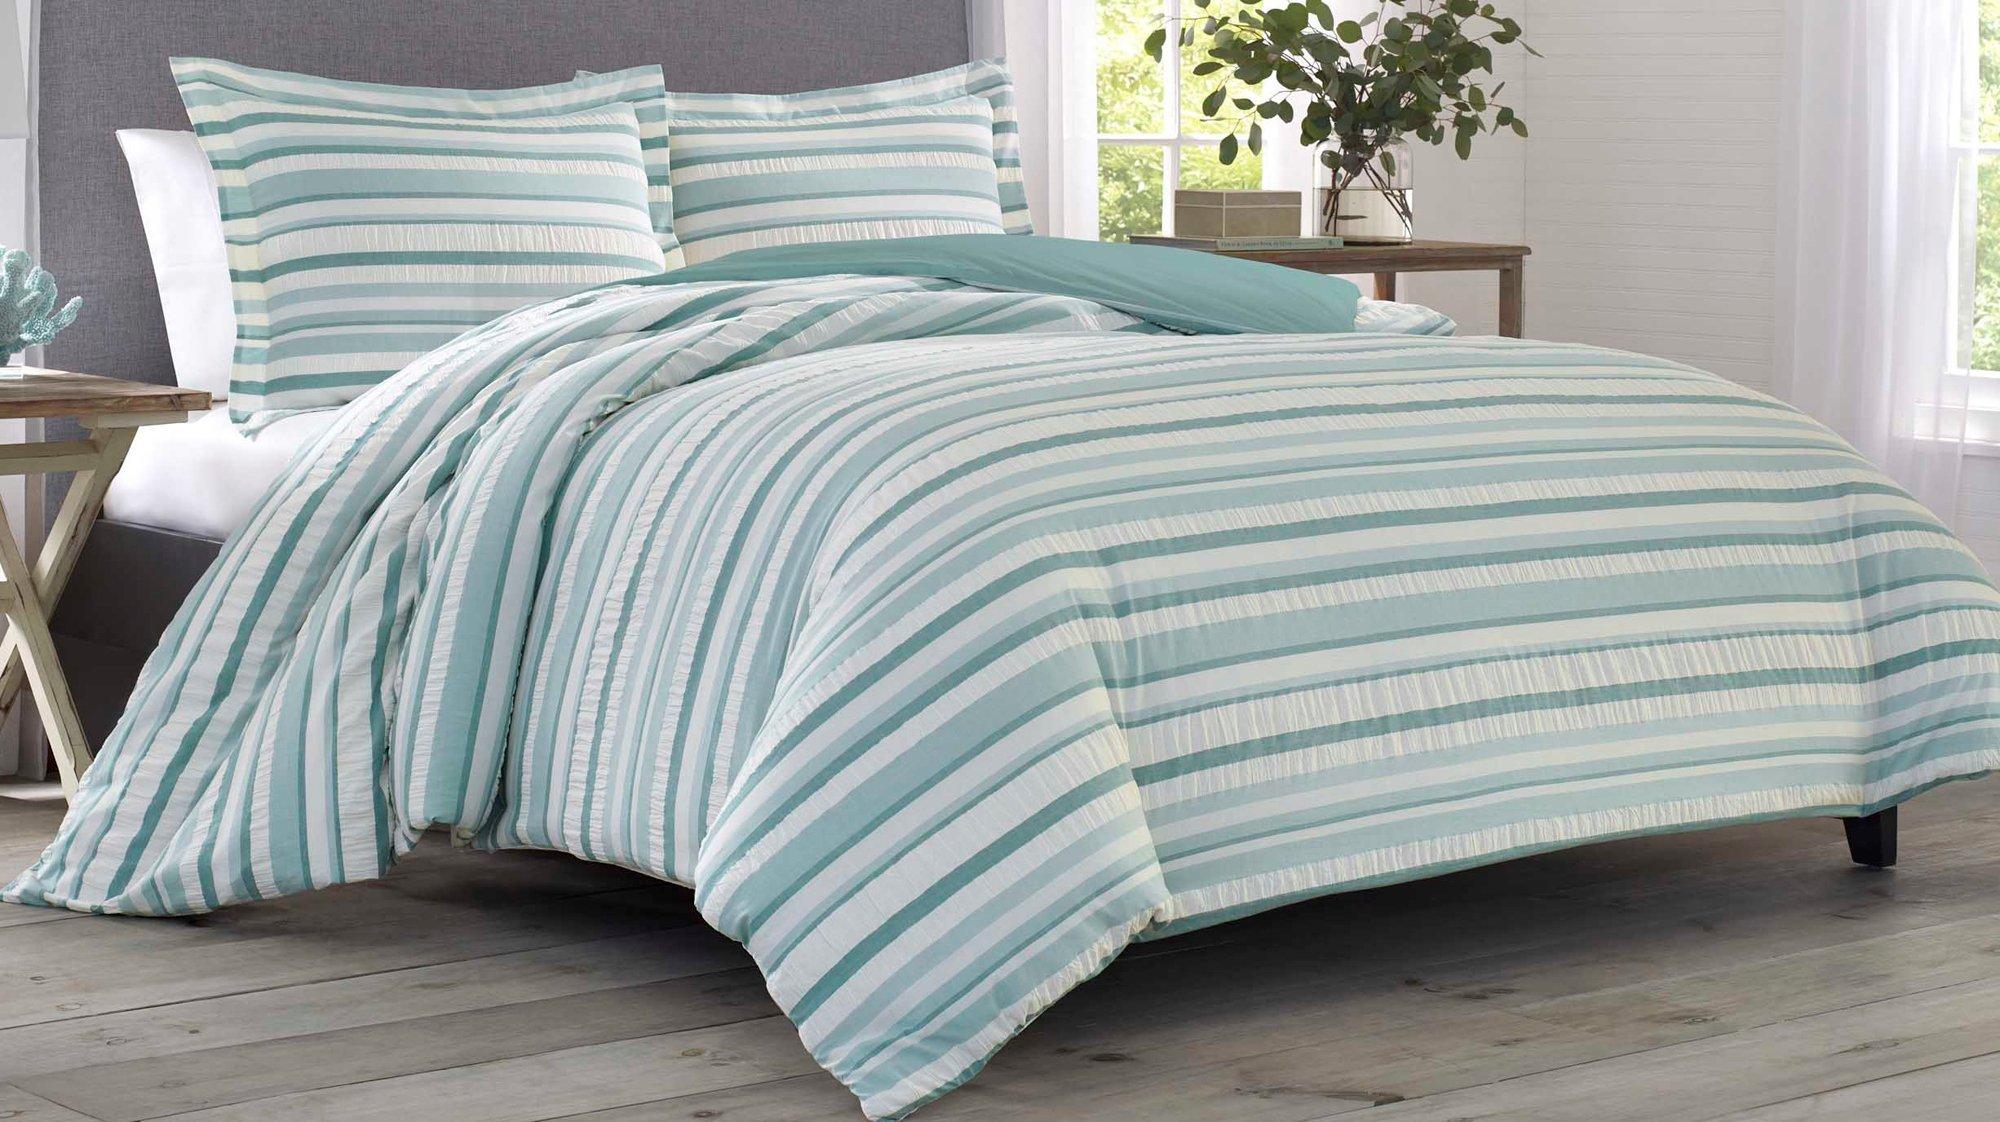 Photos - Bed Linen Tommy Bahama Clearwater Cay 3-pc. Duvet Cover Set 